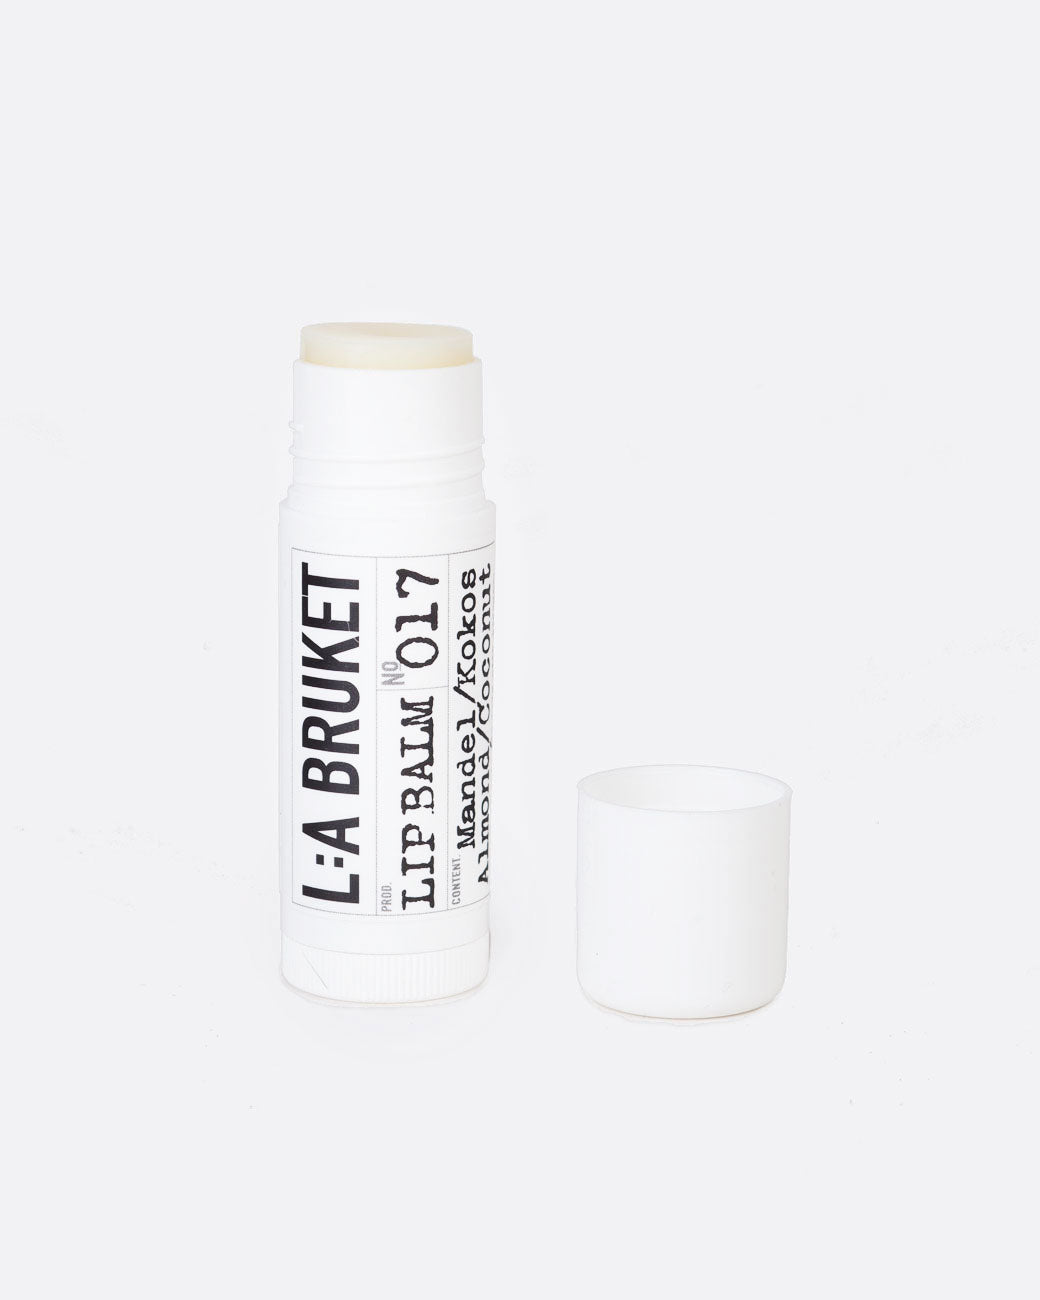 17 mL tube of L:A Bruket Almond & Coconut Lip Balm uncapped to show the clear white balm